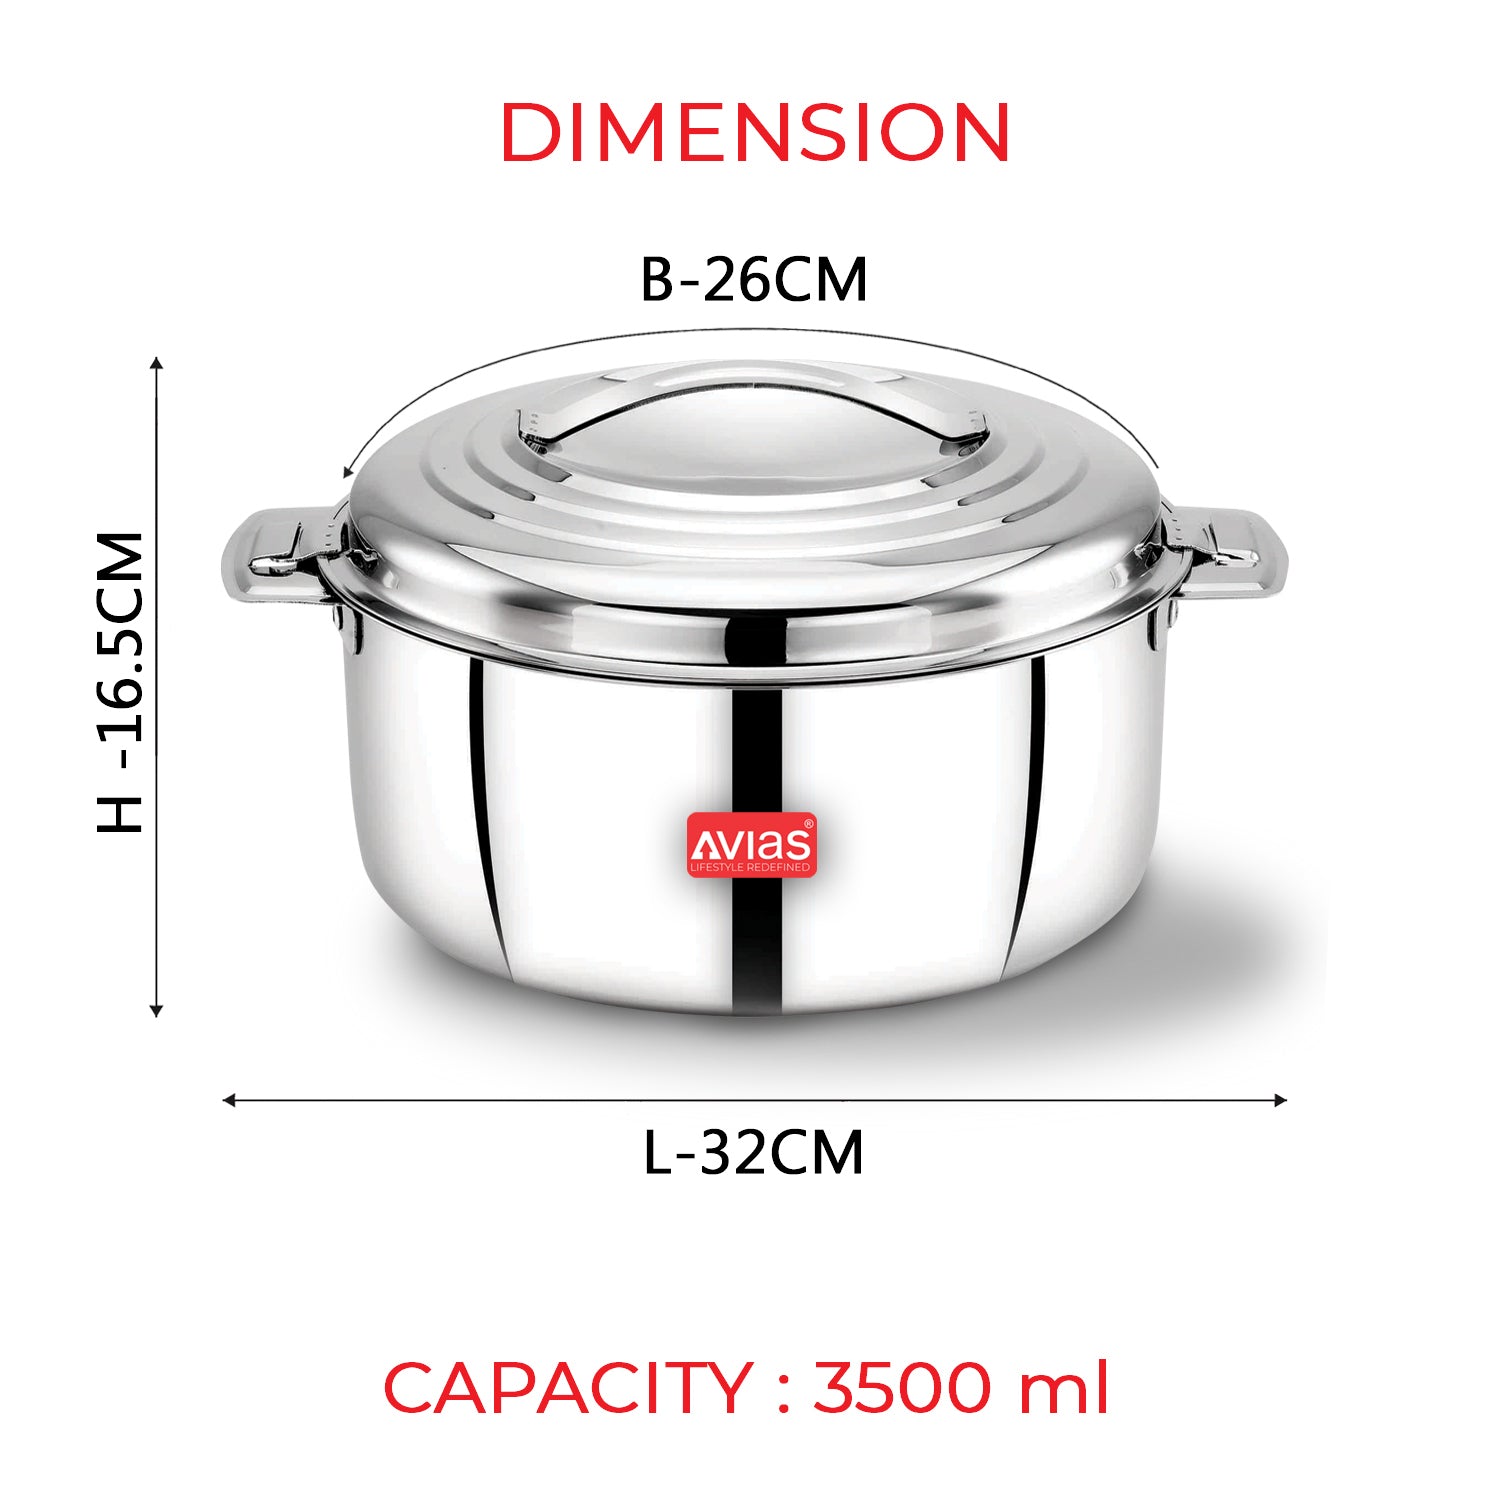 AVIAS Platina Premium Double wall insulated Stainless Steel Casserole/ Hotpot/ Chapati box/ Hot case with steel lid | Retains temperature | Twist lock | 1000ml /1500ml / 2500ml/3500/5000/7500 - Silver